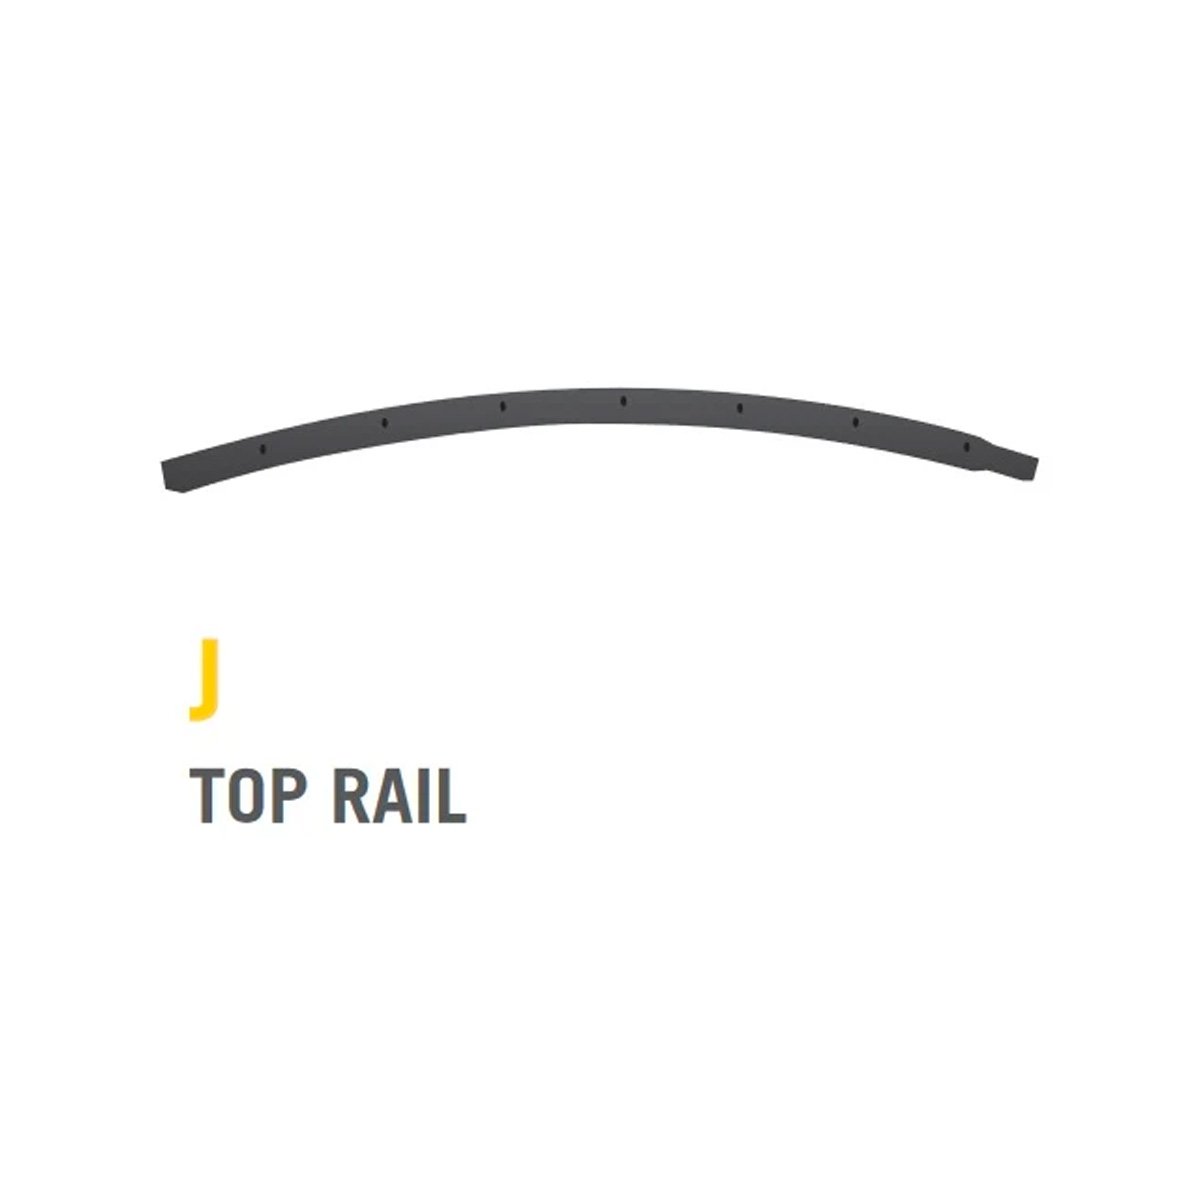 Top Rail for 15 foot Stratos Trampoline (Part J).